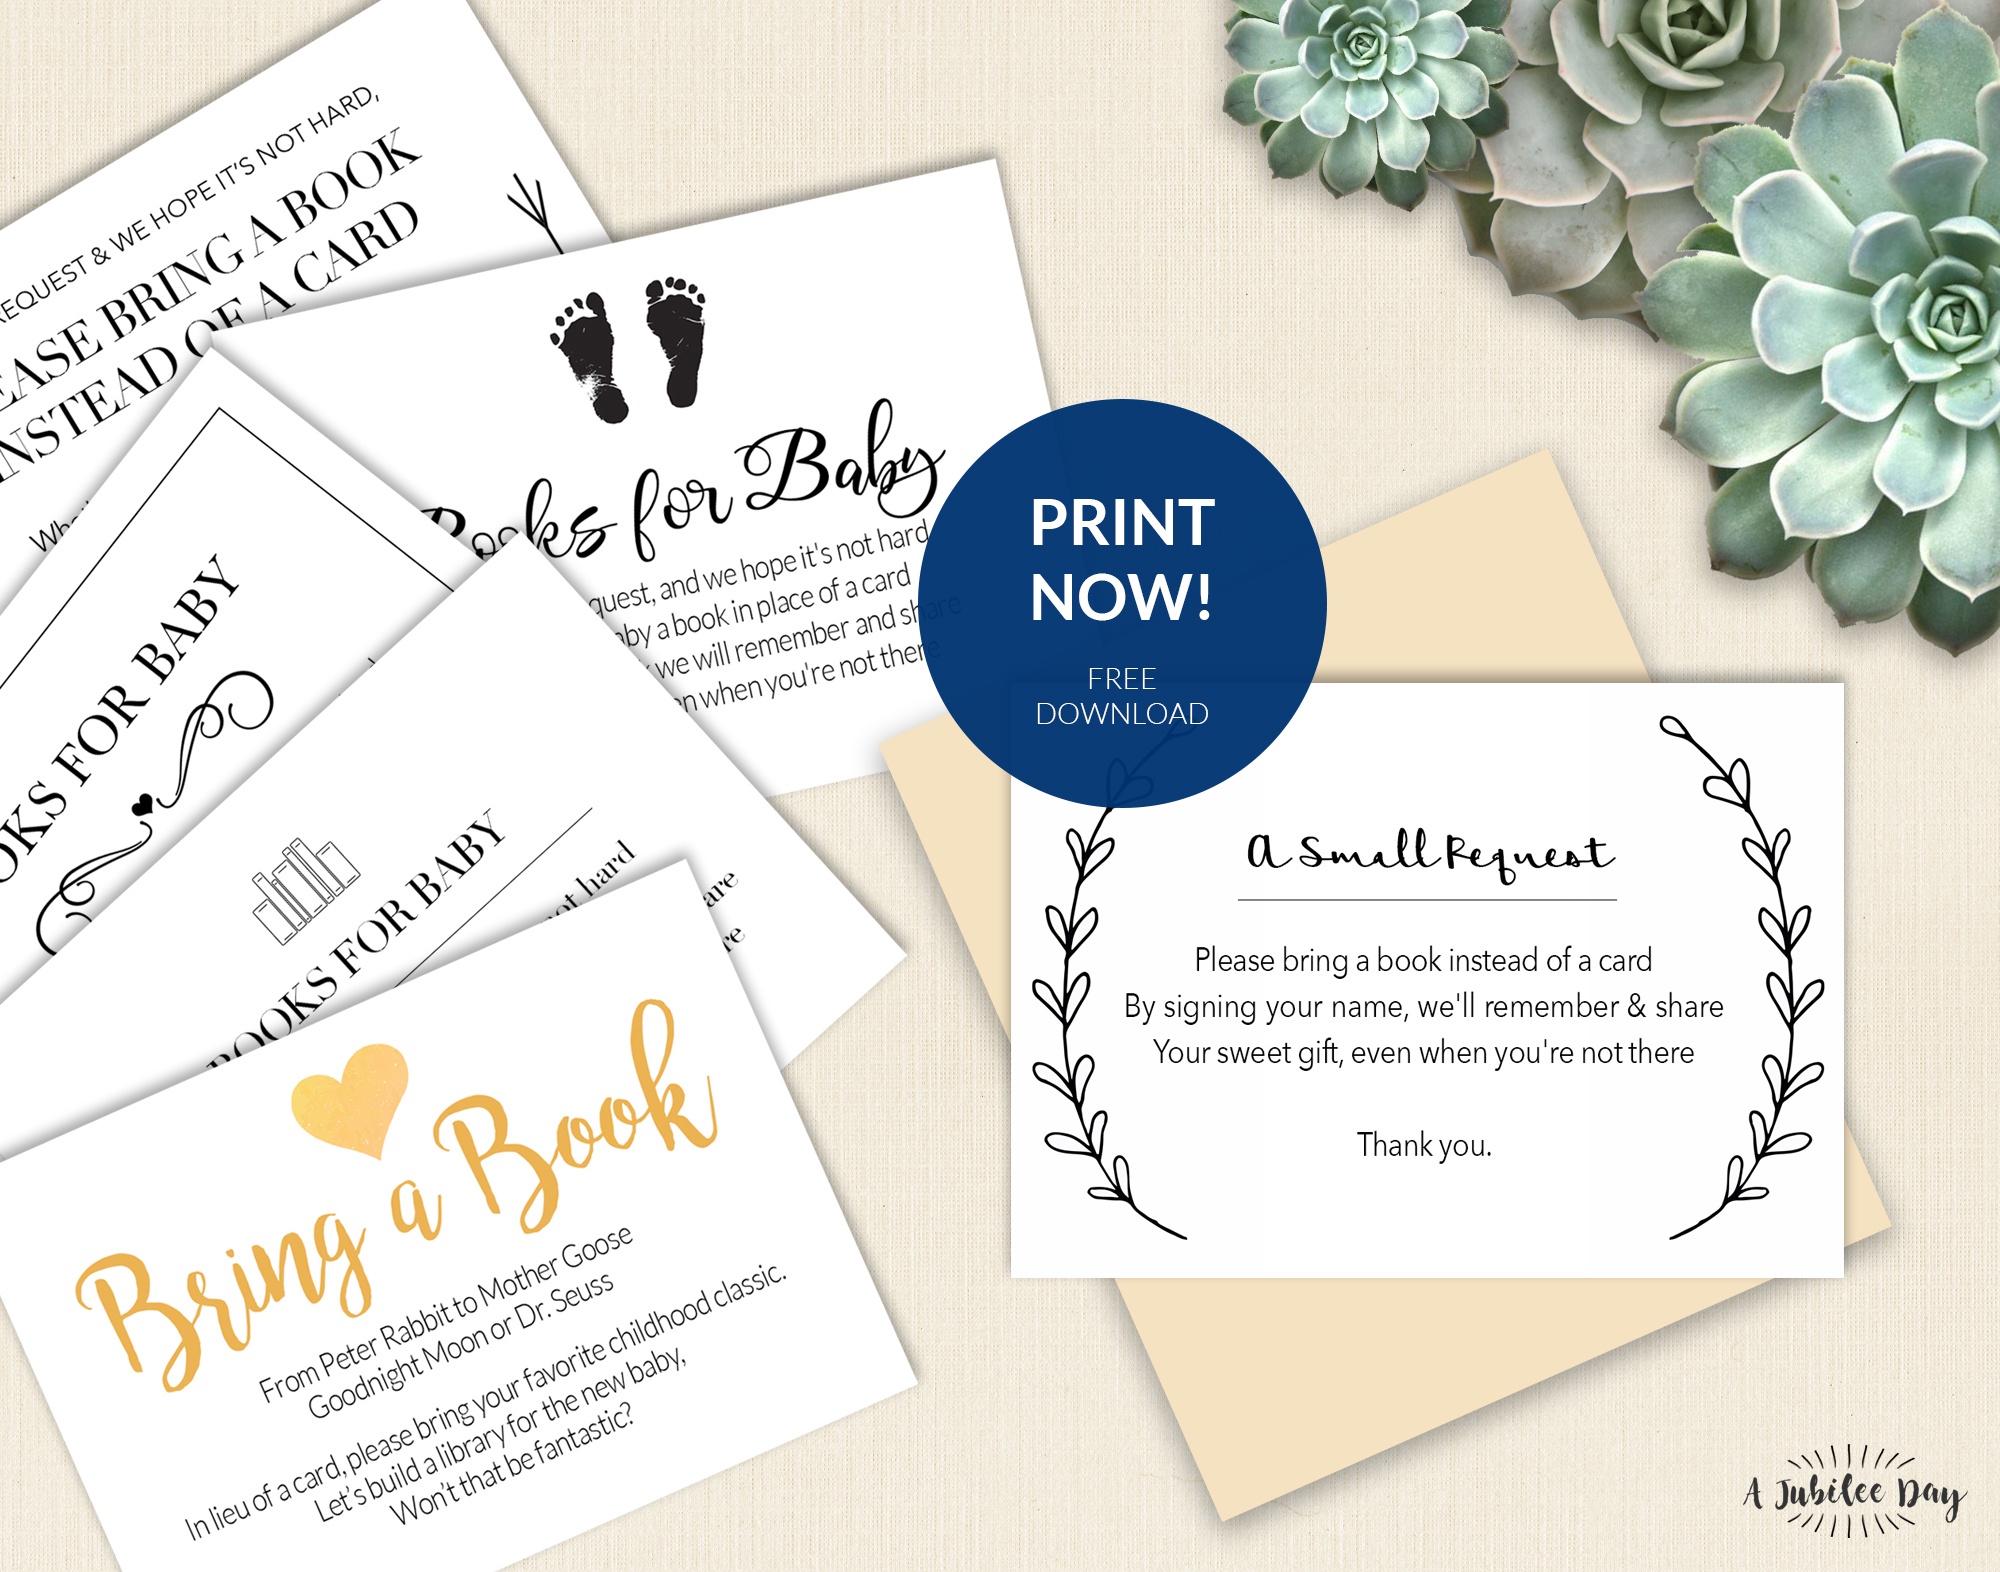 Bring A Book Instead Of Card (Free Printable!) - A Jubilee Day - Free Printable Registry Cards